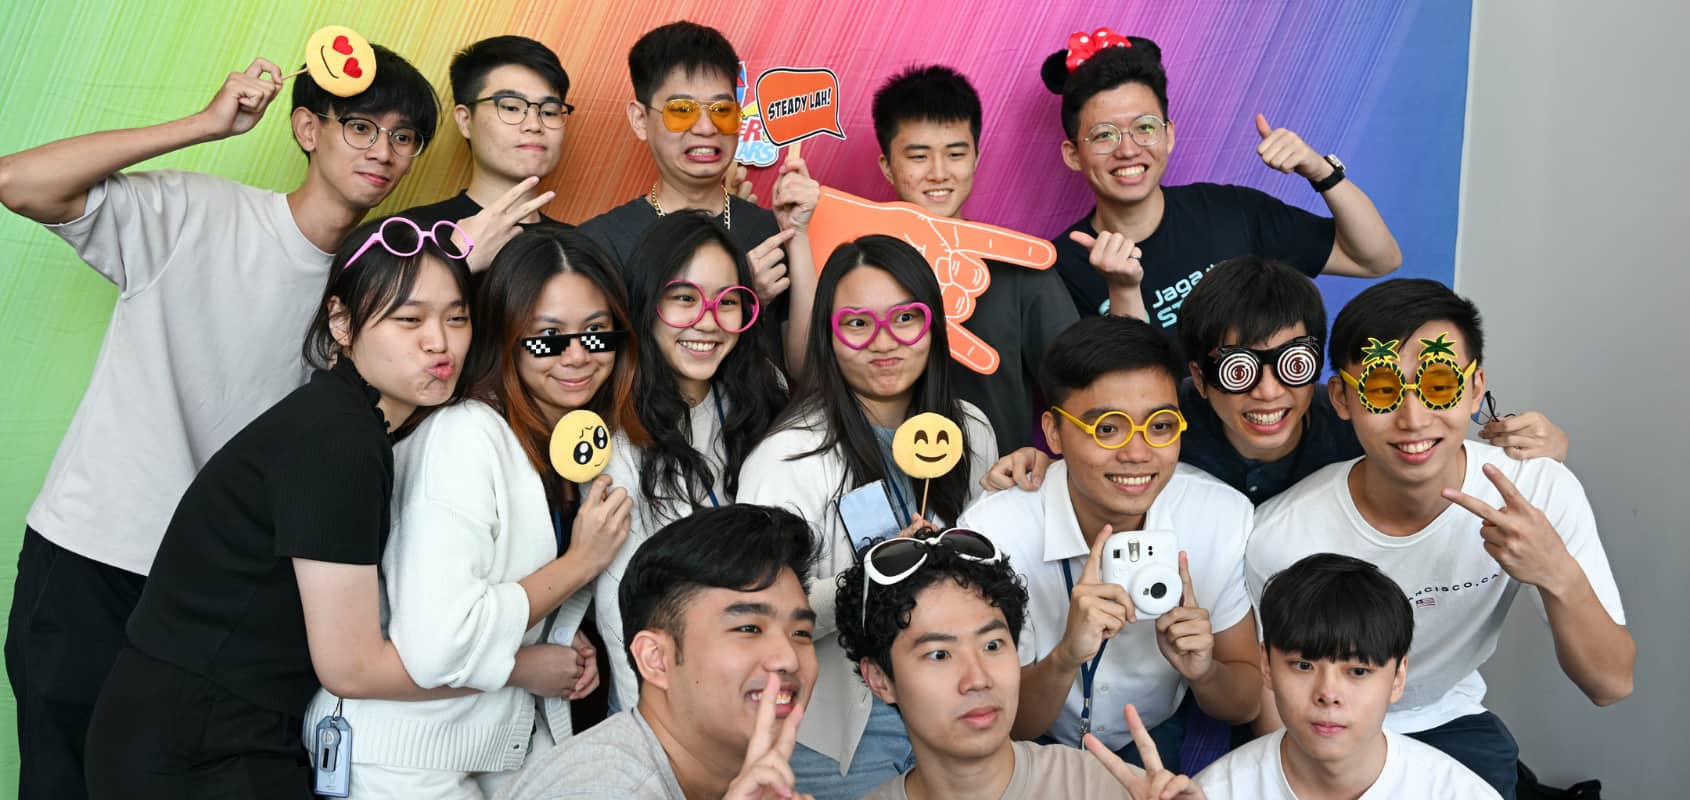 Batch of past GovTech interns having fun while posing for a photo at a photo booth